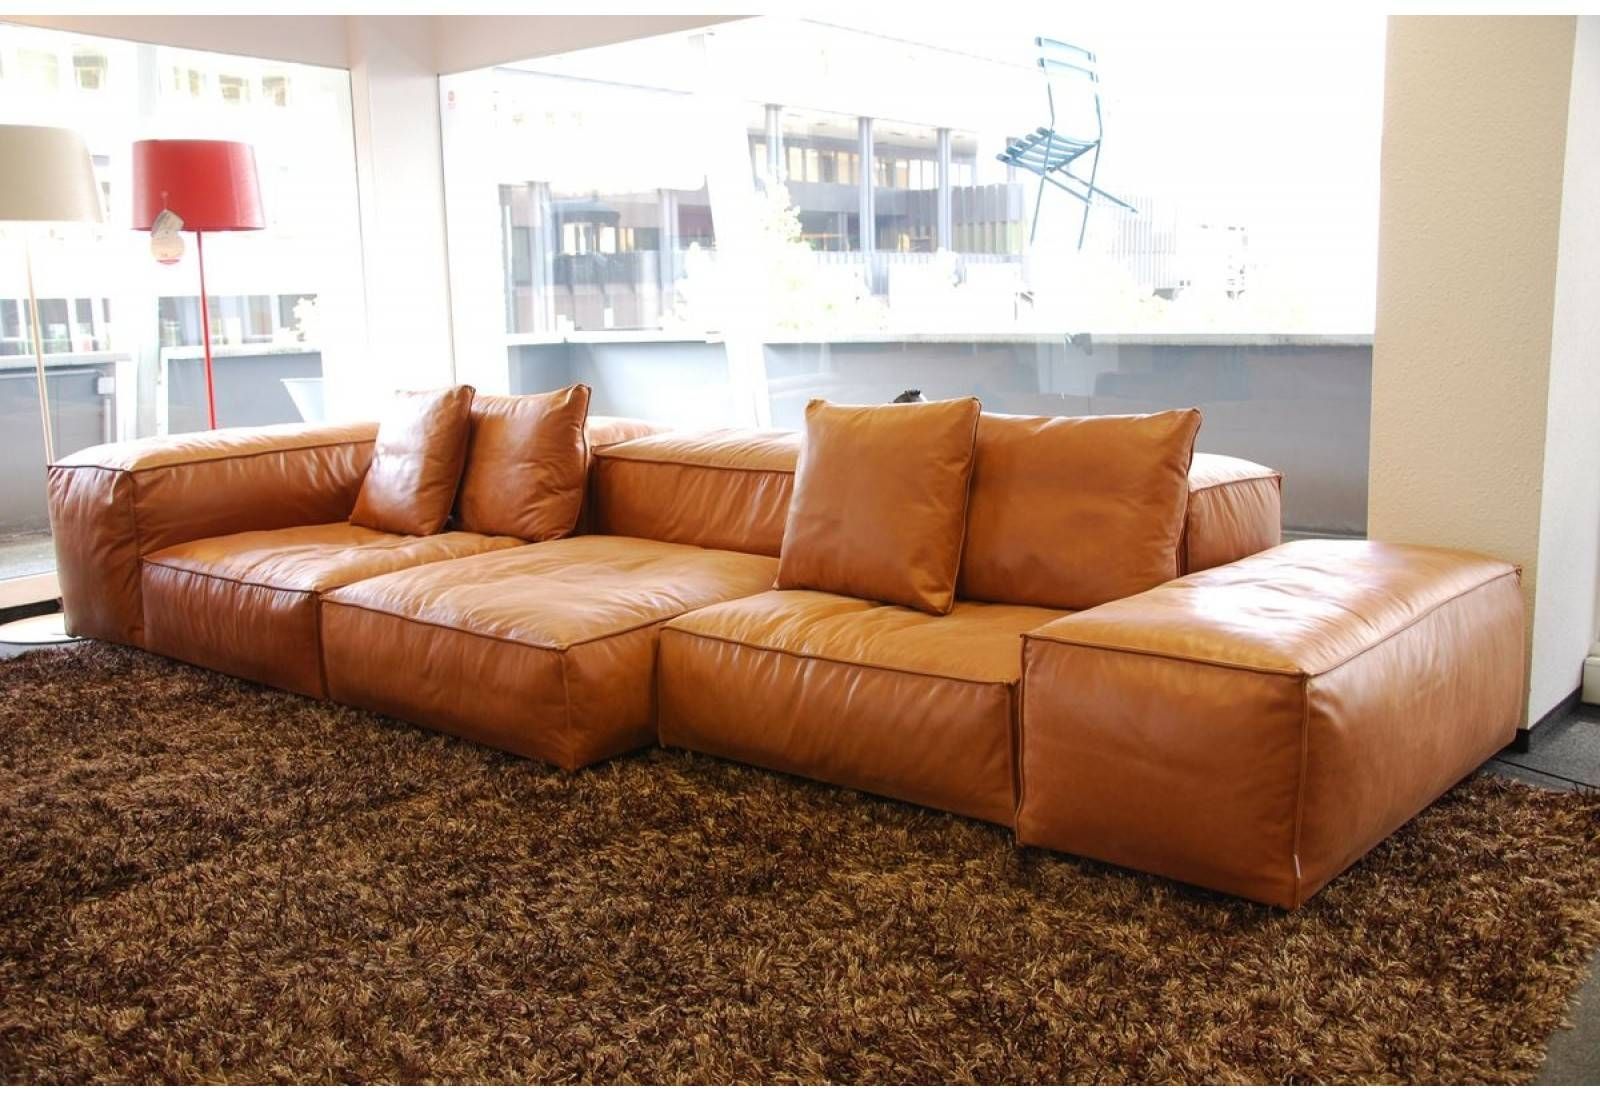 Seating furniture – leather sectional
sofa